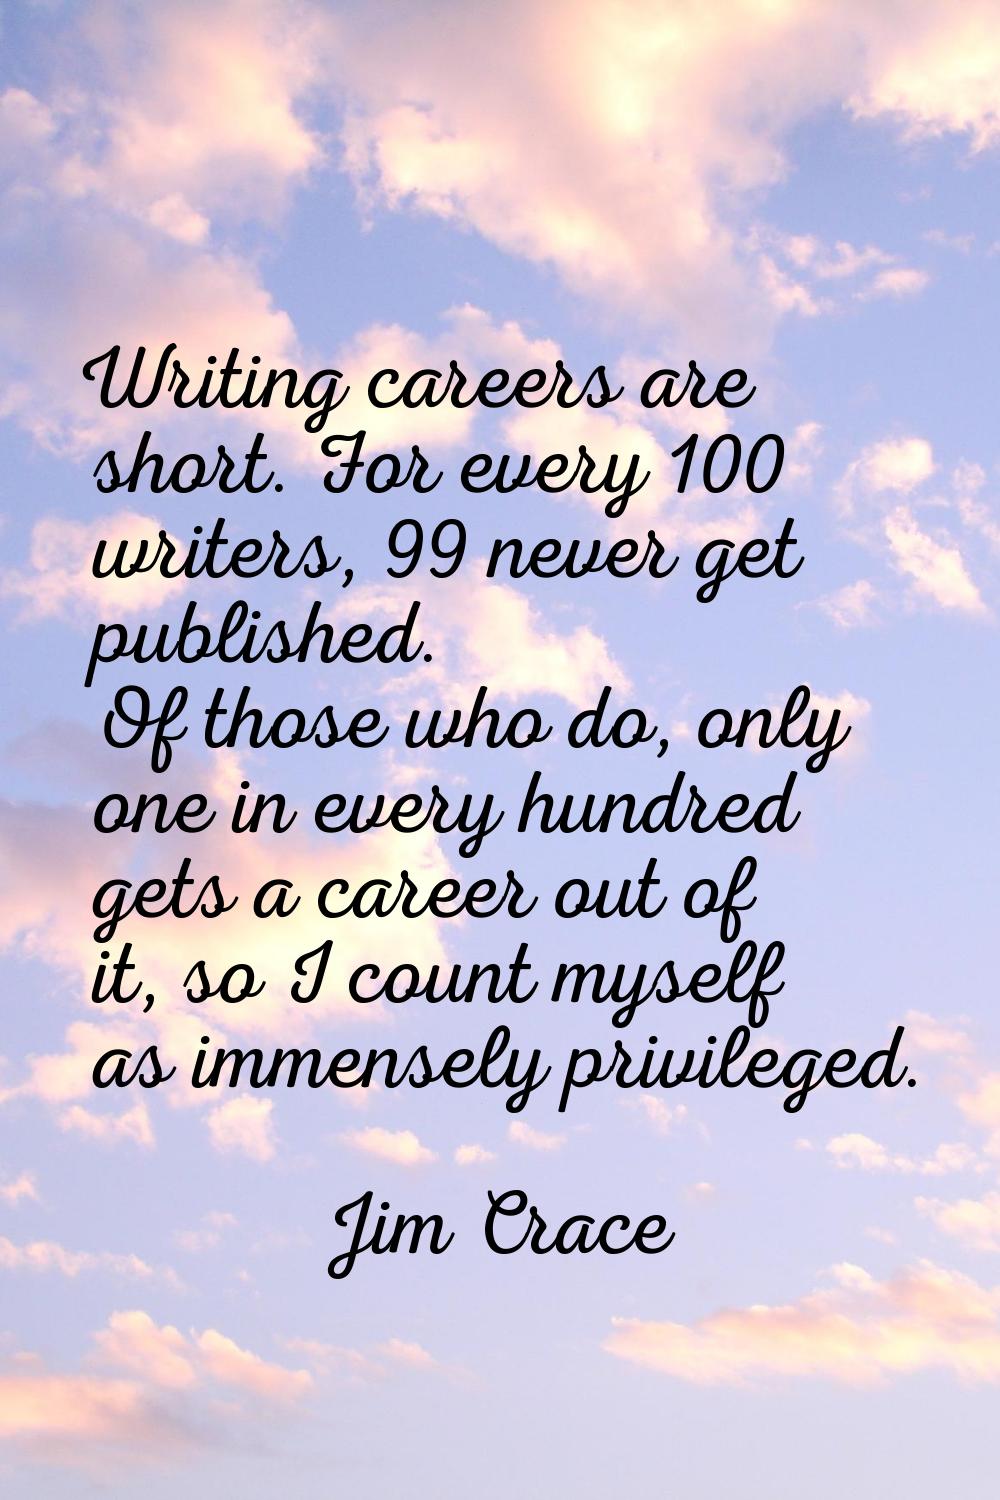 Writing careers are short. For every 100 writers, 99 never get published. Of those who do, only one